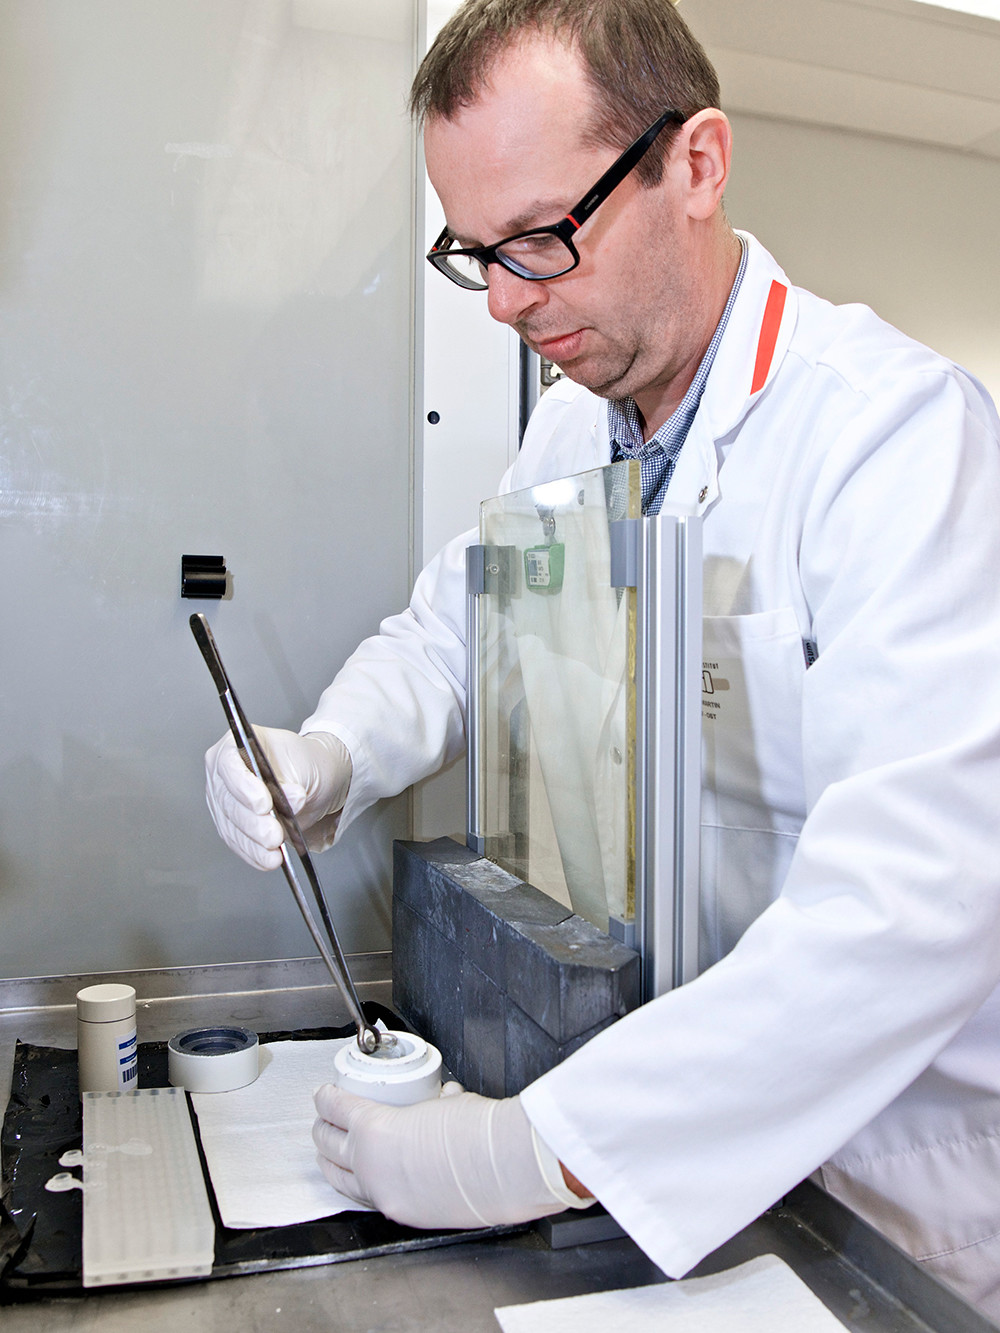 The utmost care is always called for when handling radioactive materials: Martin Béhé working behind radiation shielding glass and lead blocks as he removes the radionuclide lutetium-177 from a small lead container to couple it to a target molecule. (Photo: Paul Scherrer Institute/Markus Fischer)